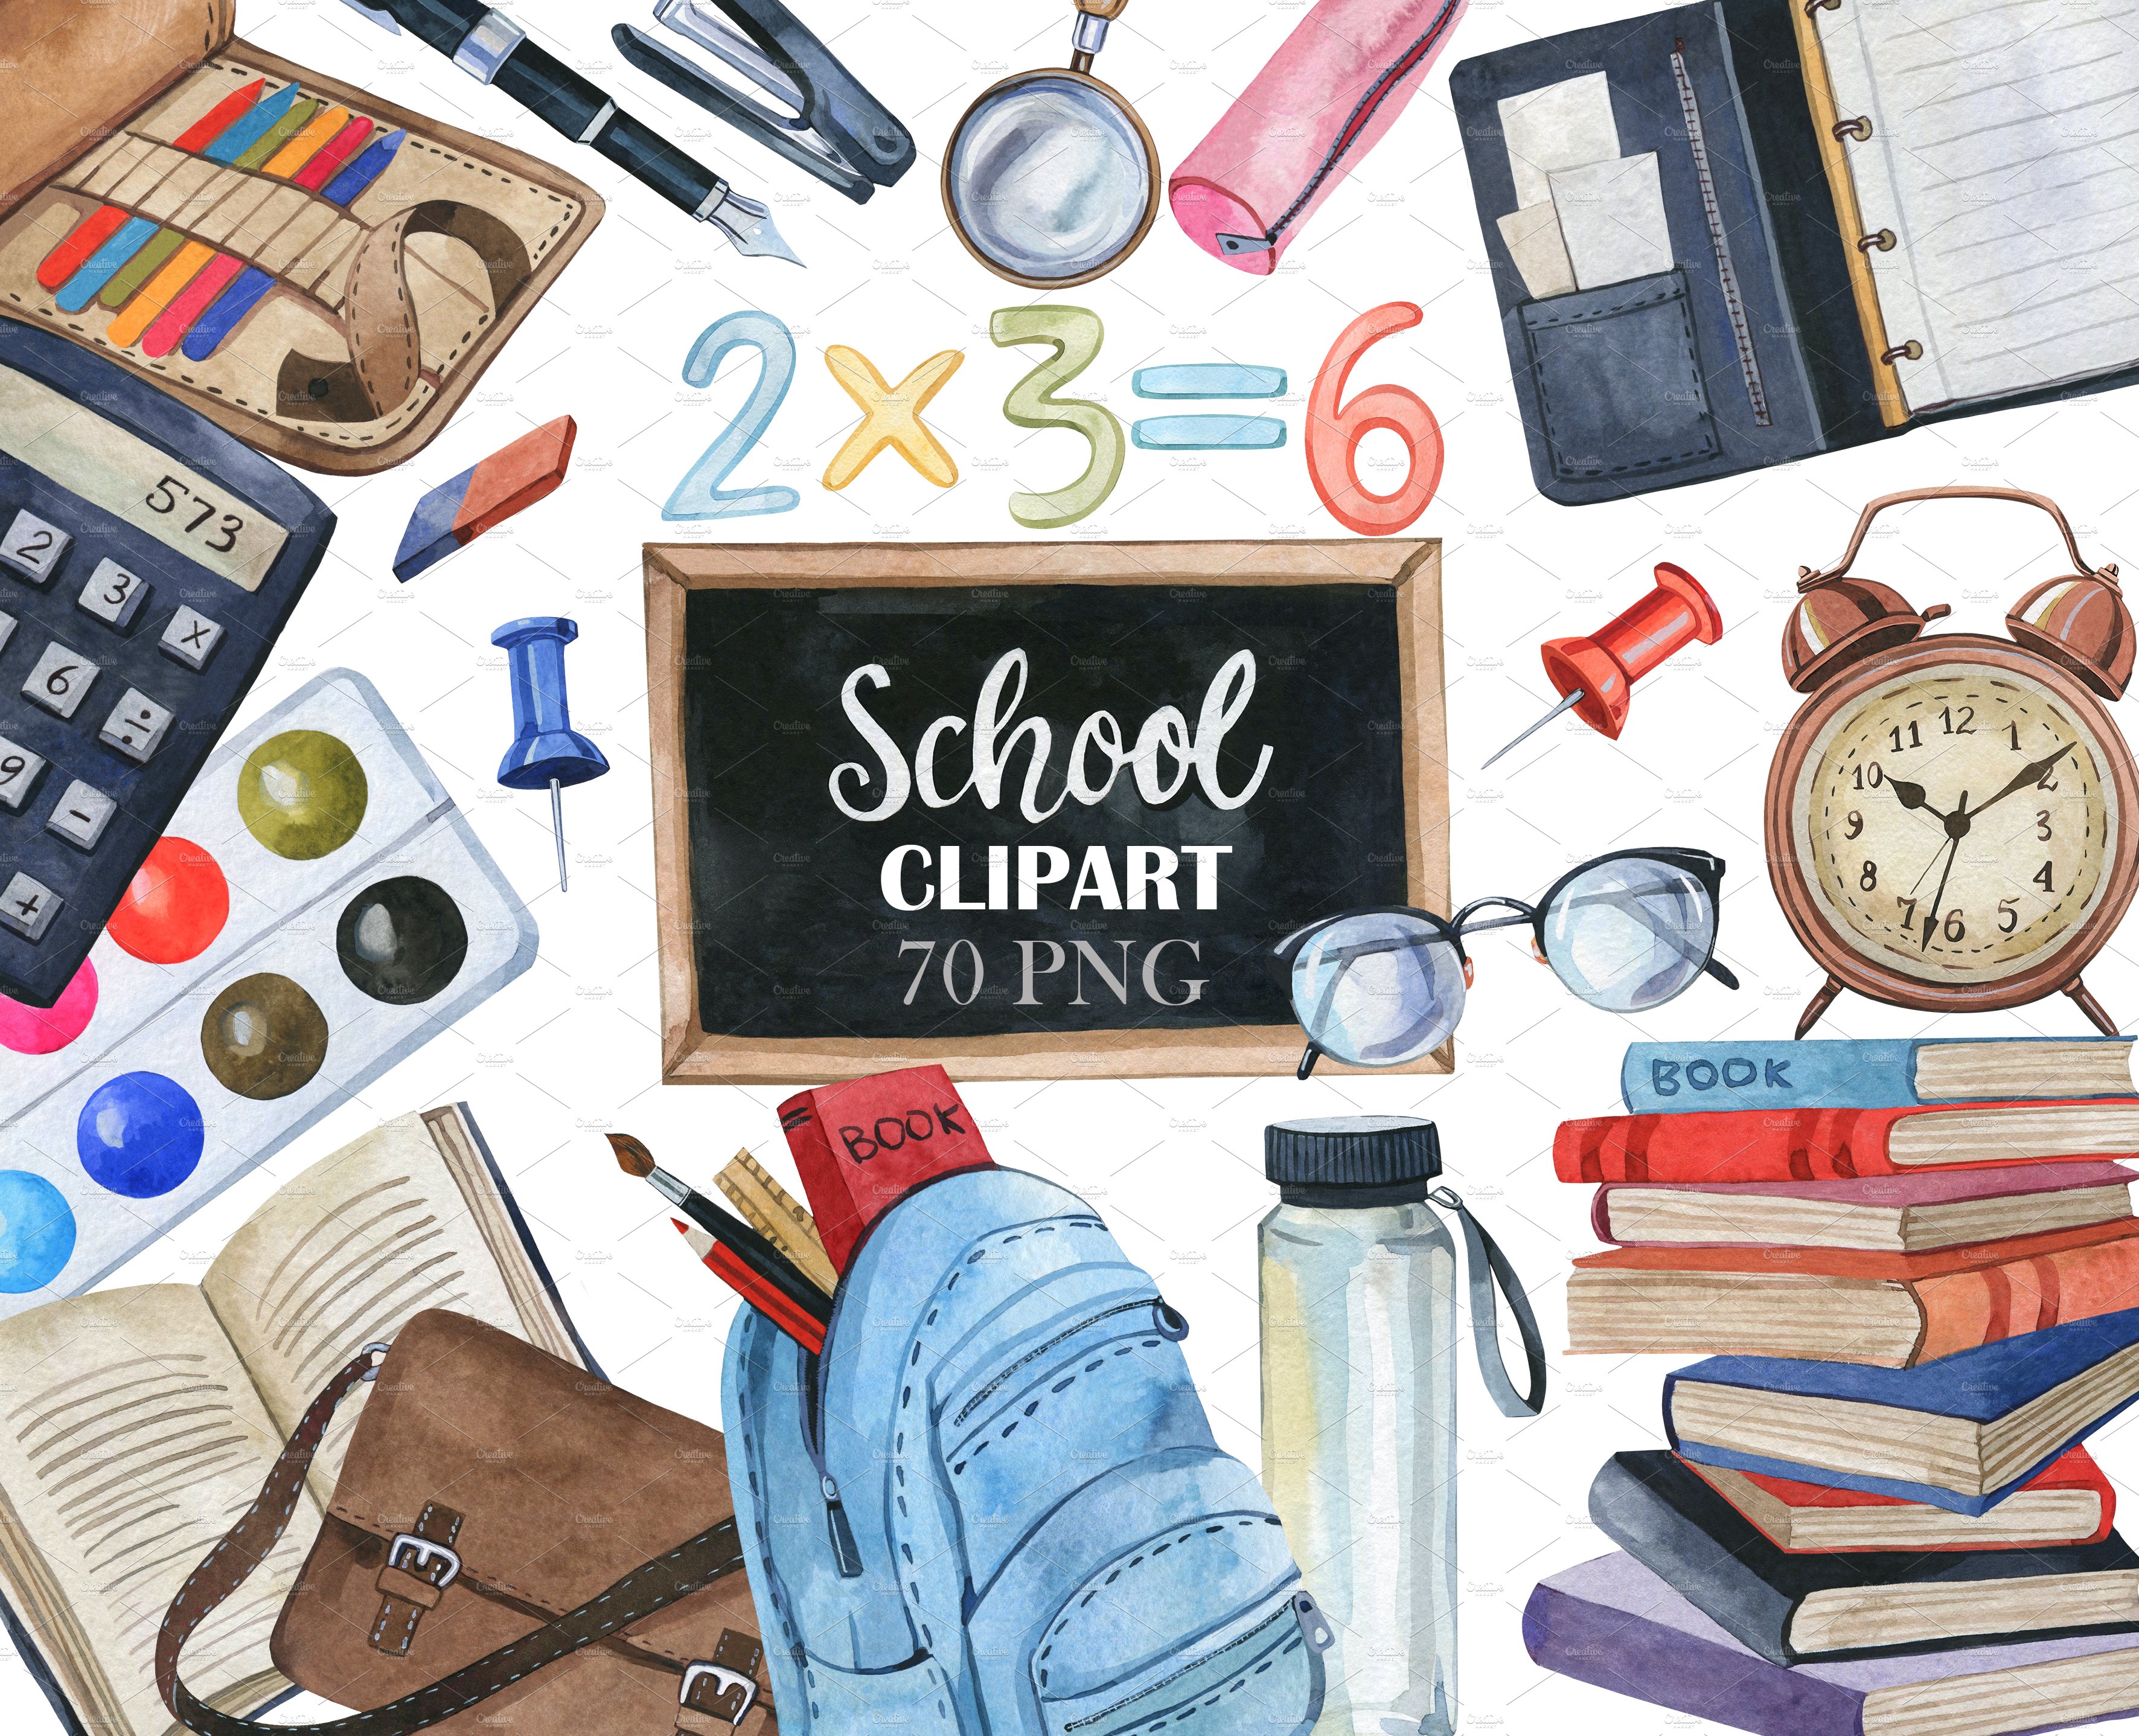 Watercolor School Clipart, PNG cover image.